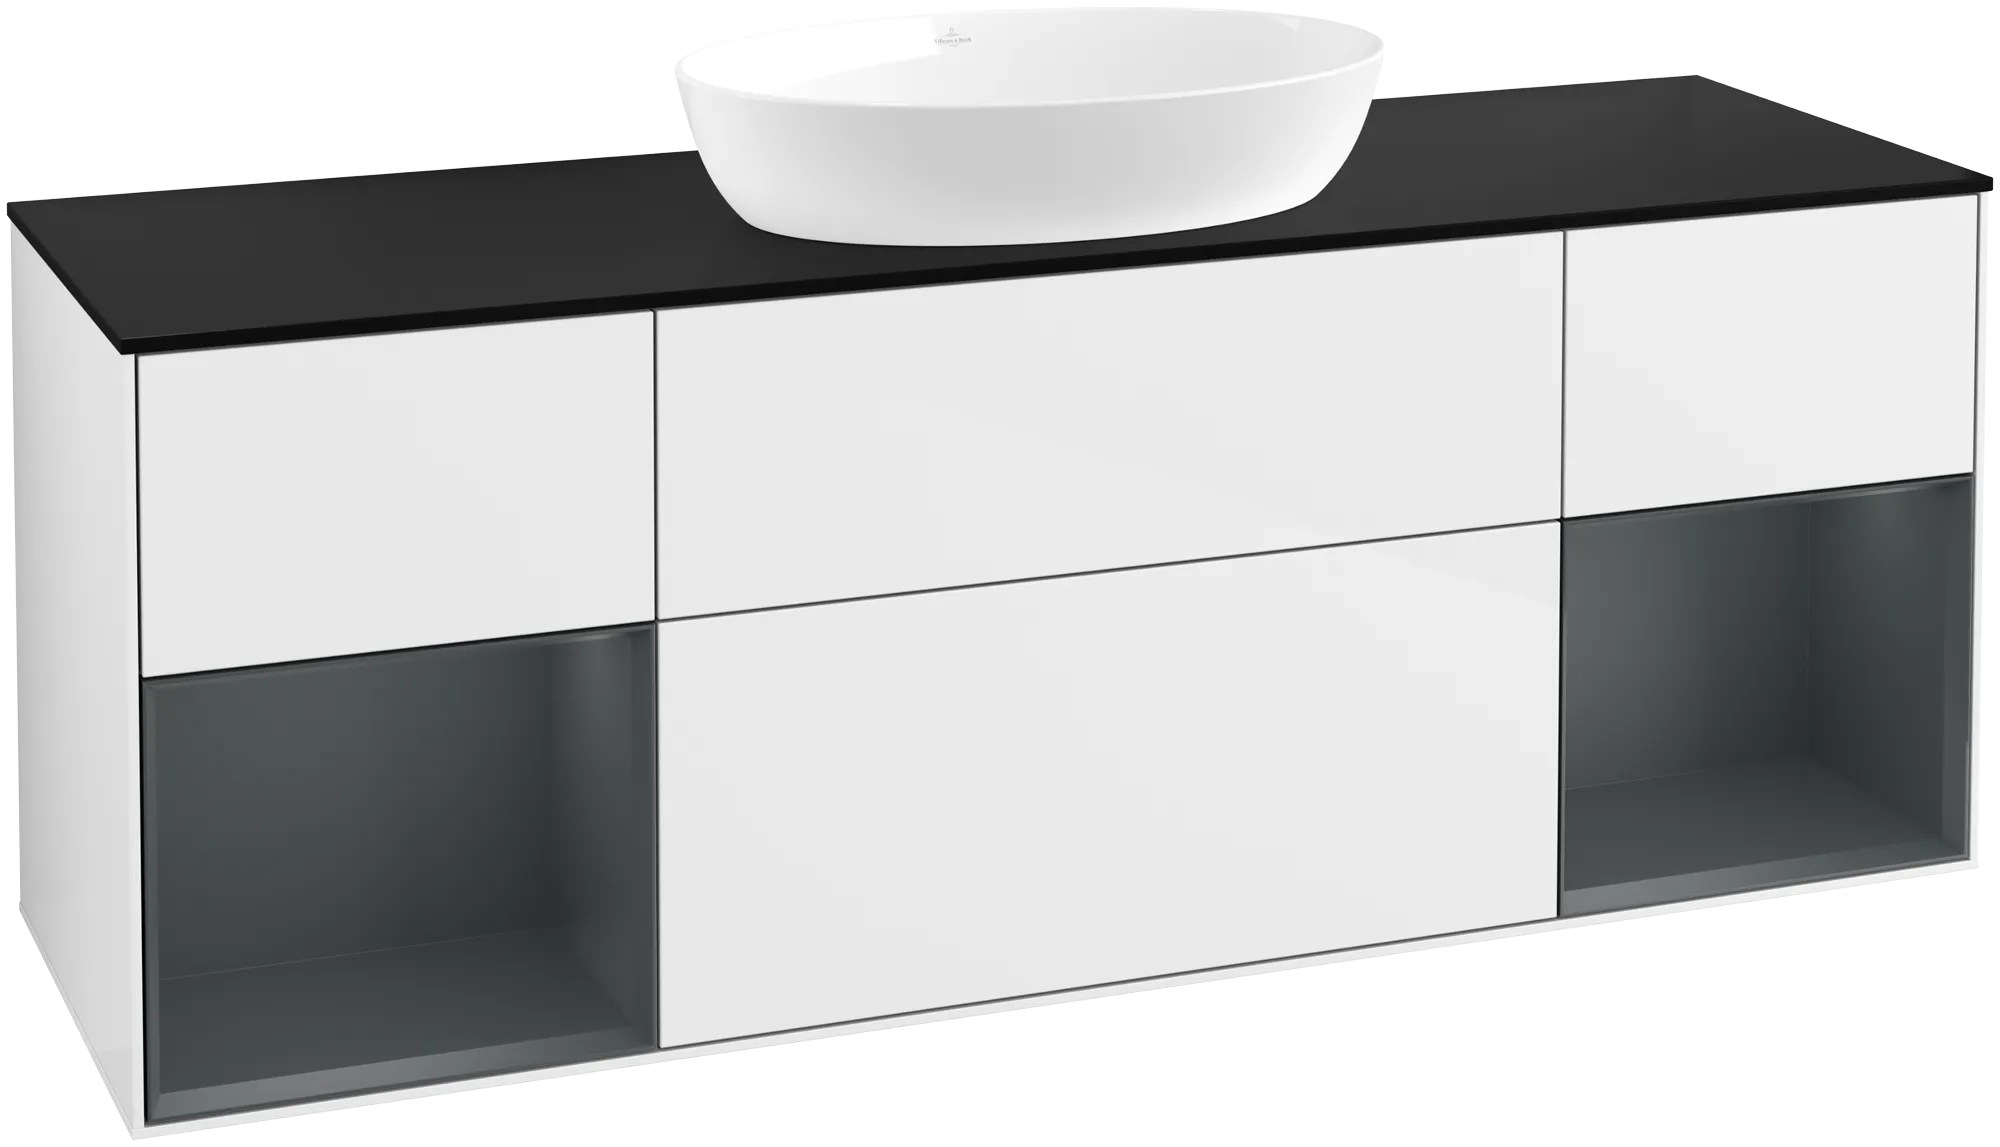 Picture of VILLEROY BOCH Finion Vanity unit, with lighting, 4 pull-out compartments, 1600 x 603 x 501 mm, Glossy White Lacquer / Midnight Blue Matt Lacquer / Glass Black Matt #GD02HGGF